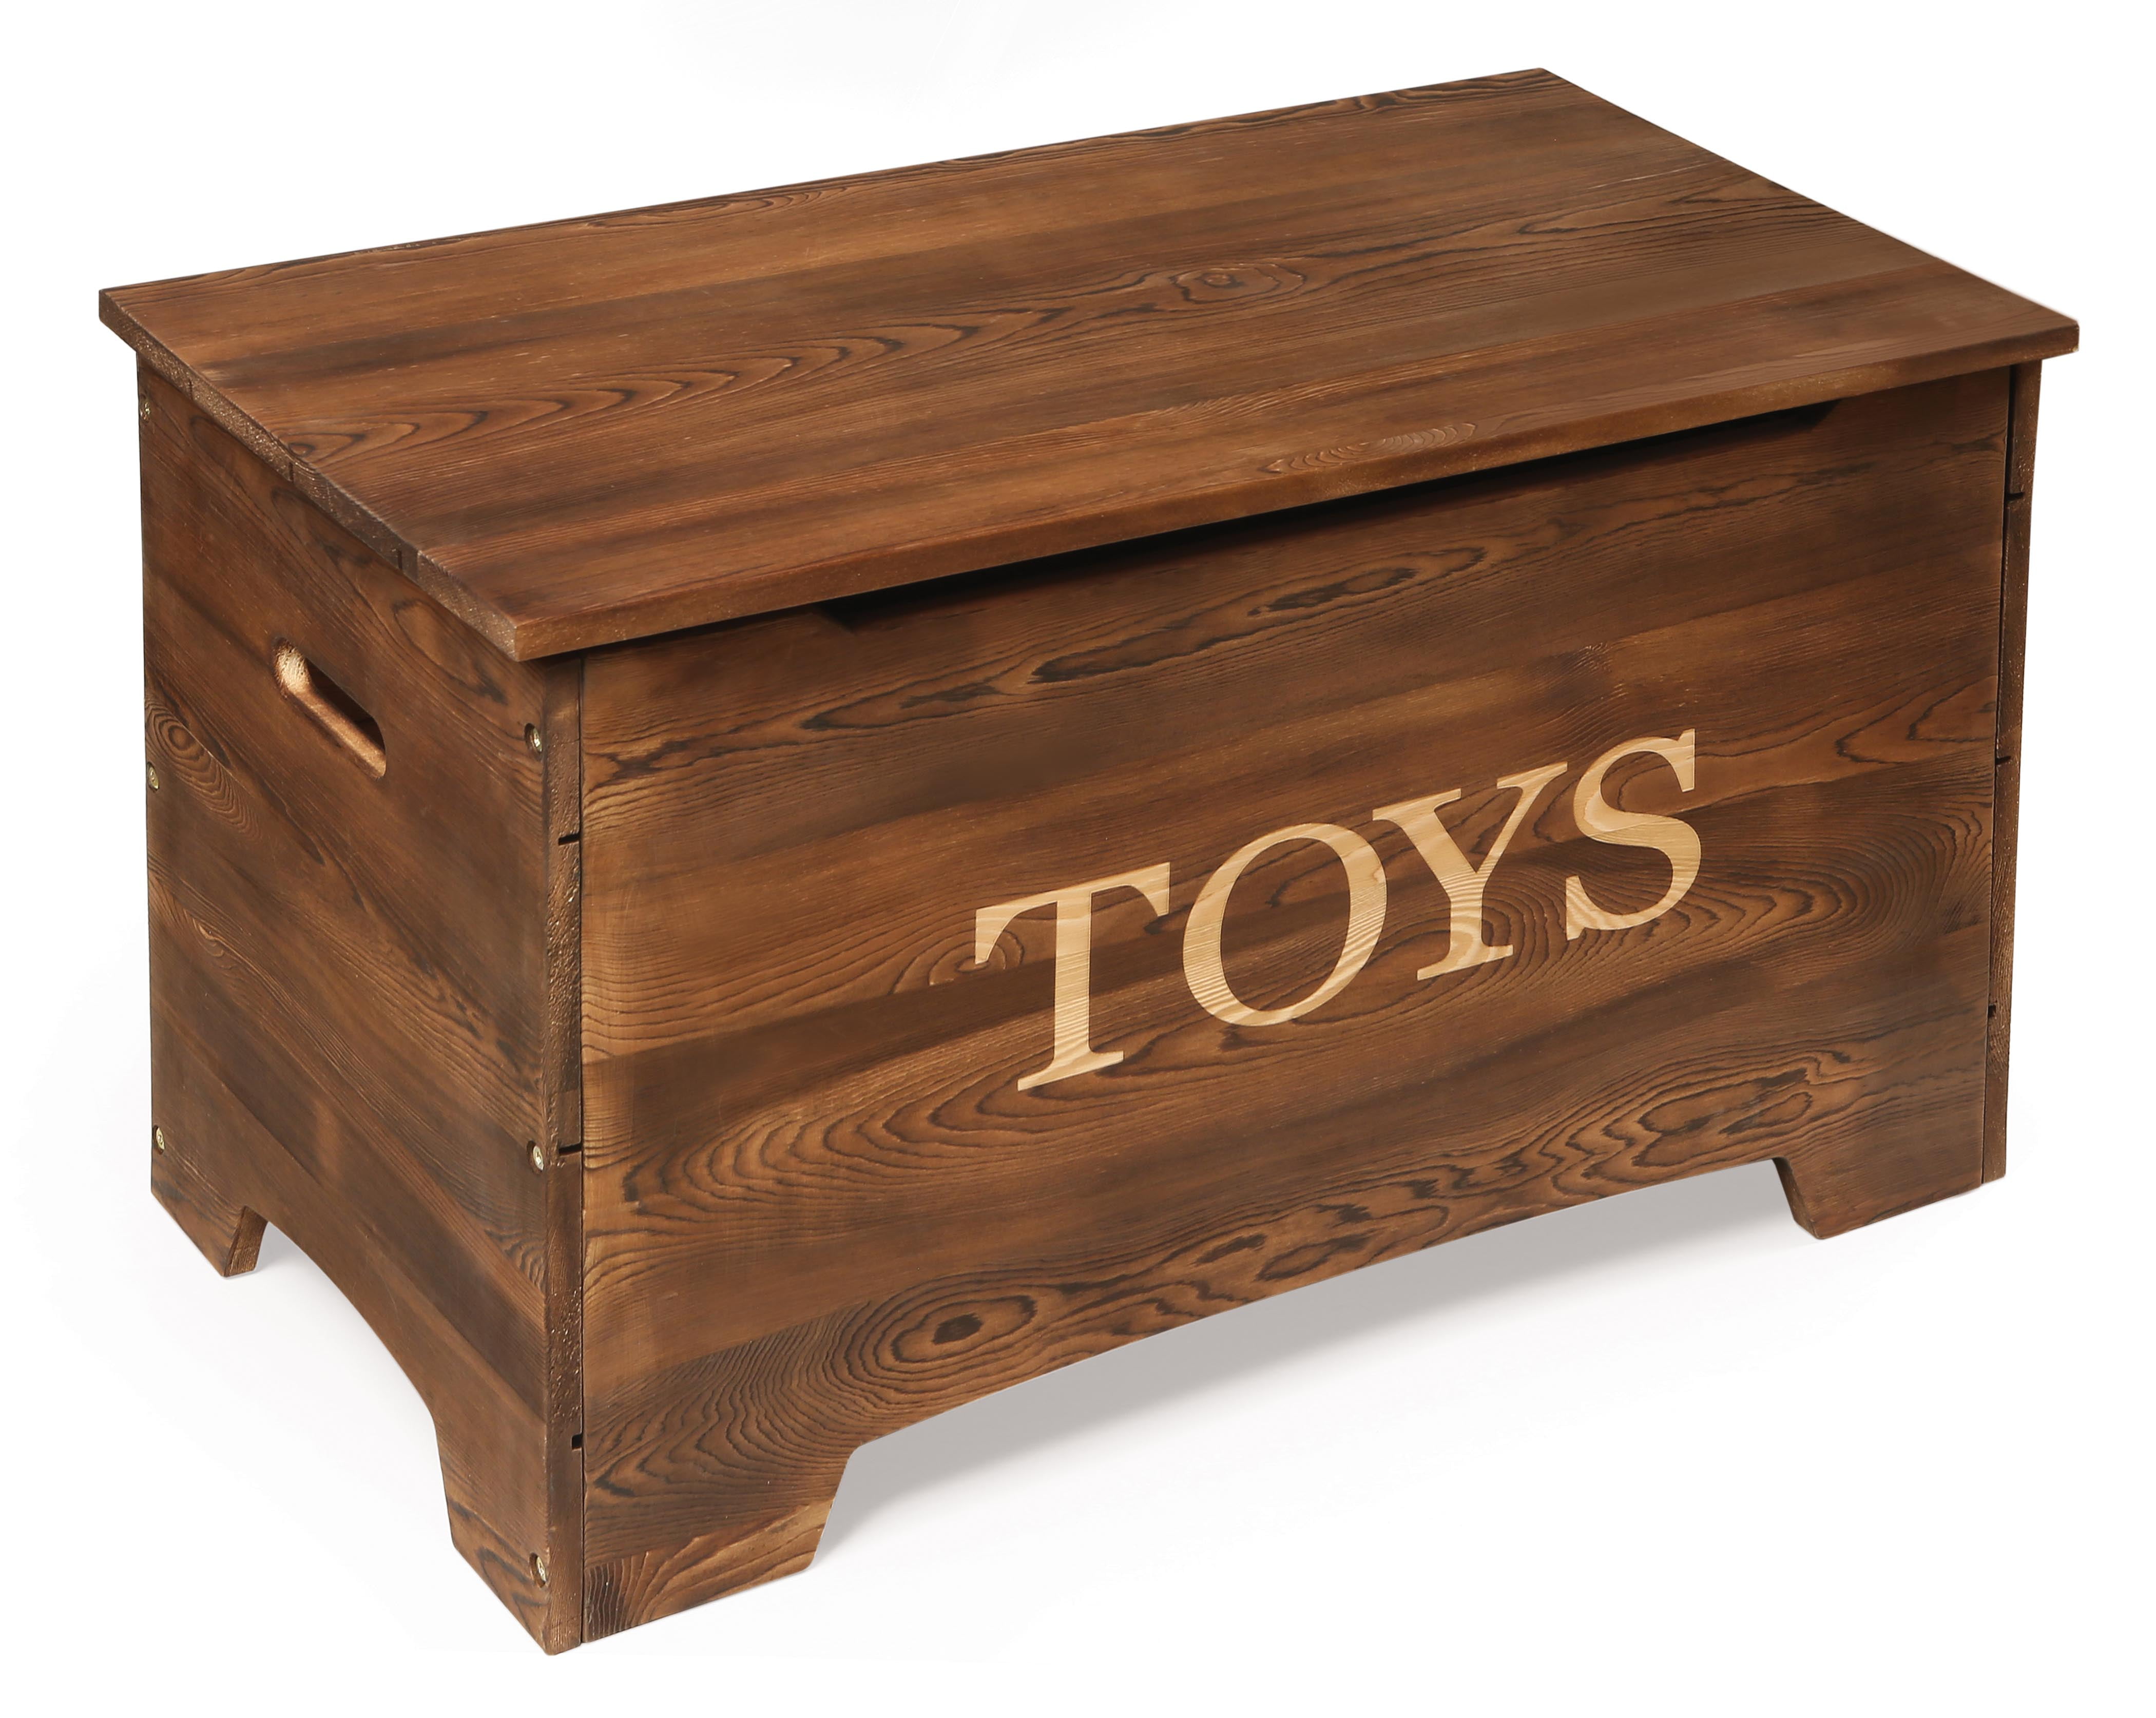 Football-Shaped Storage & Toy Box for Sale